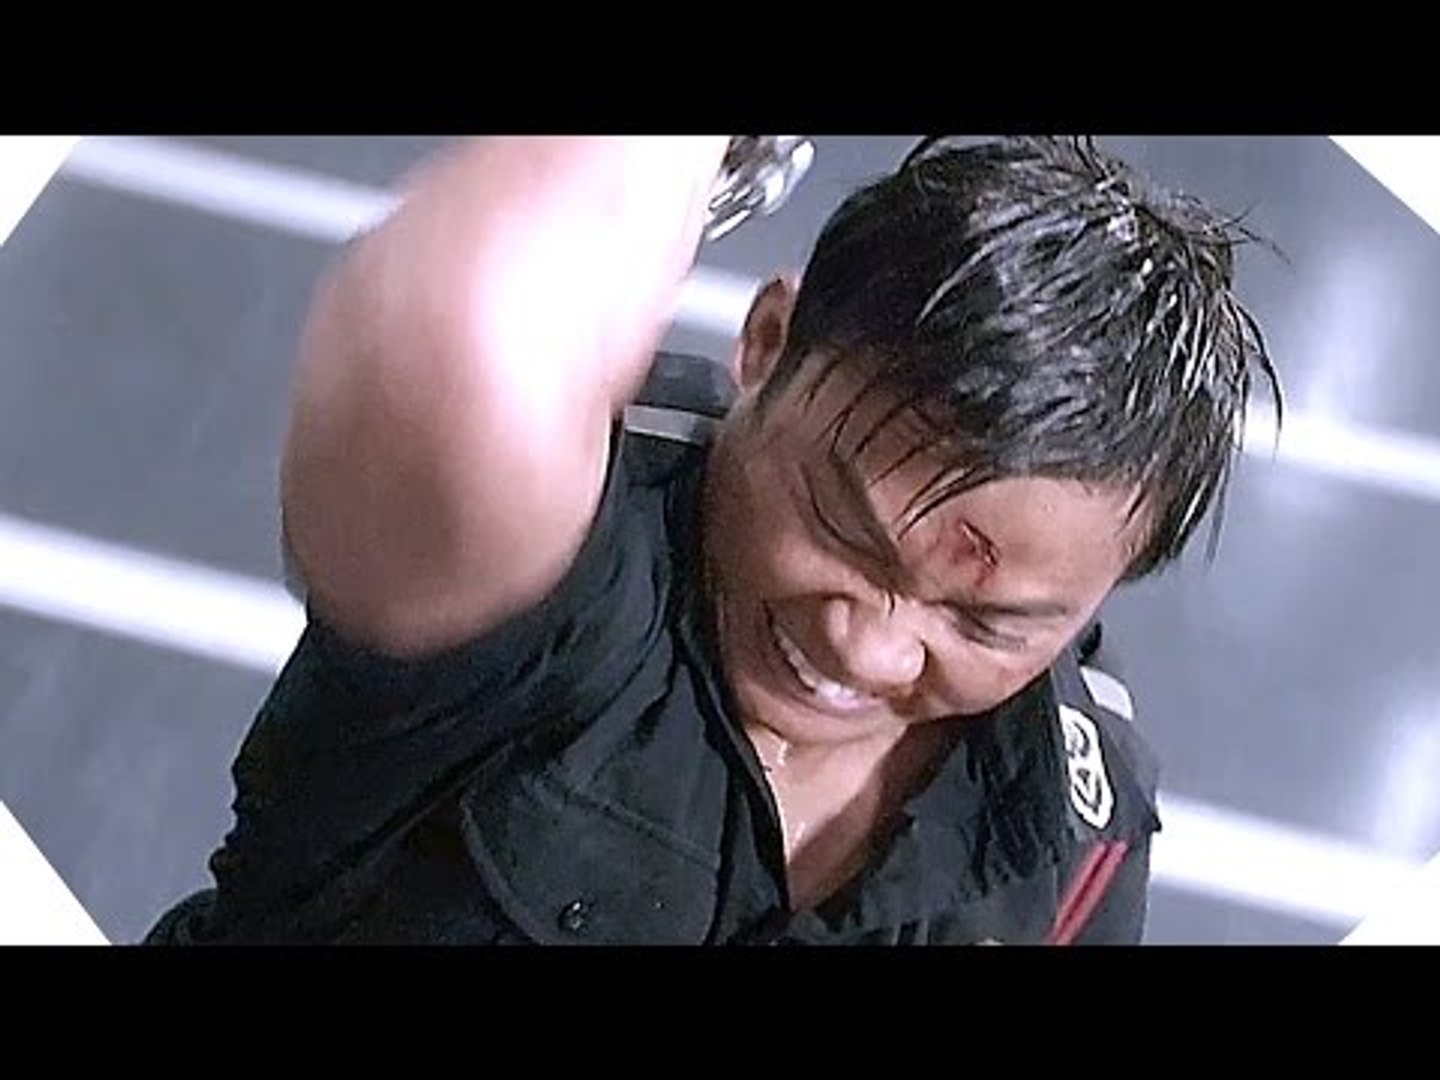 KILL ZONE 2 Official Trailer, Action Martial Arts Film